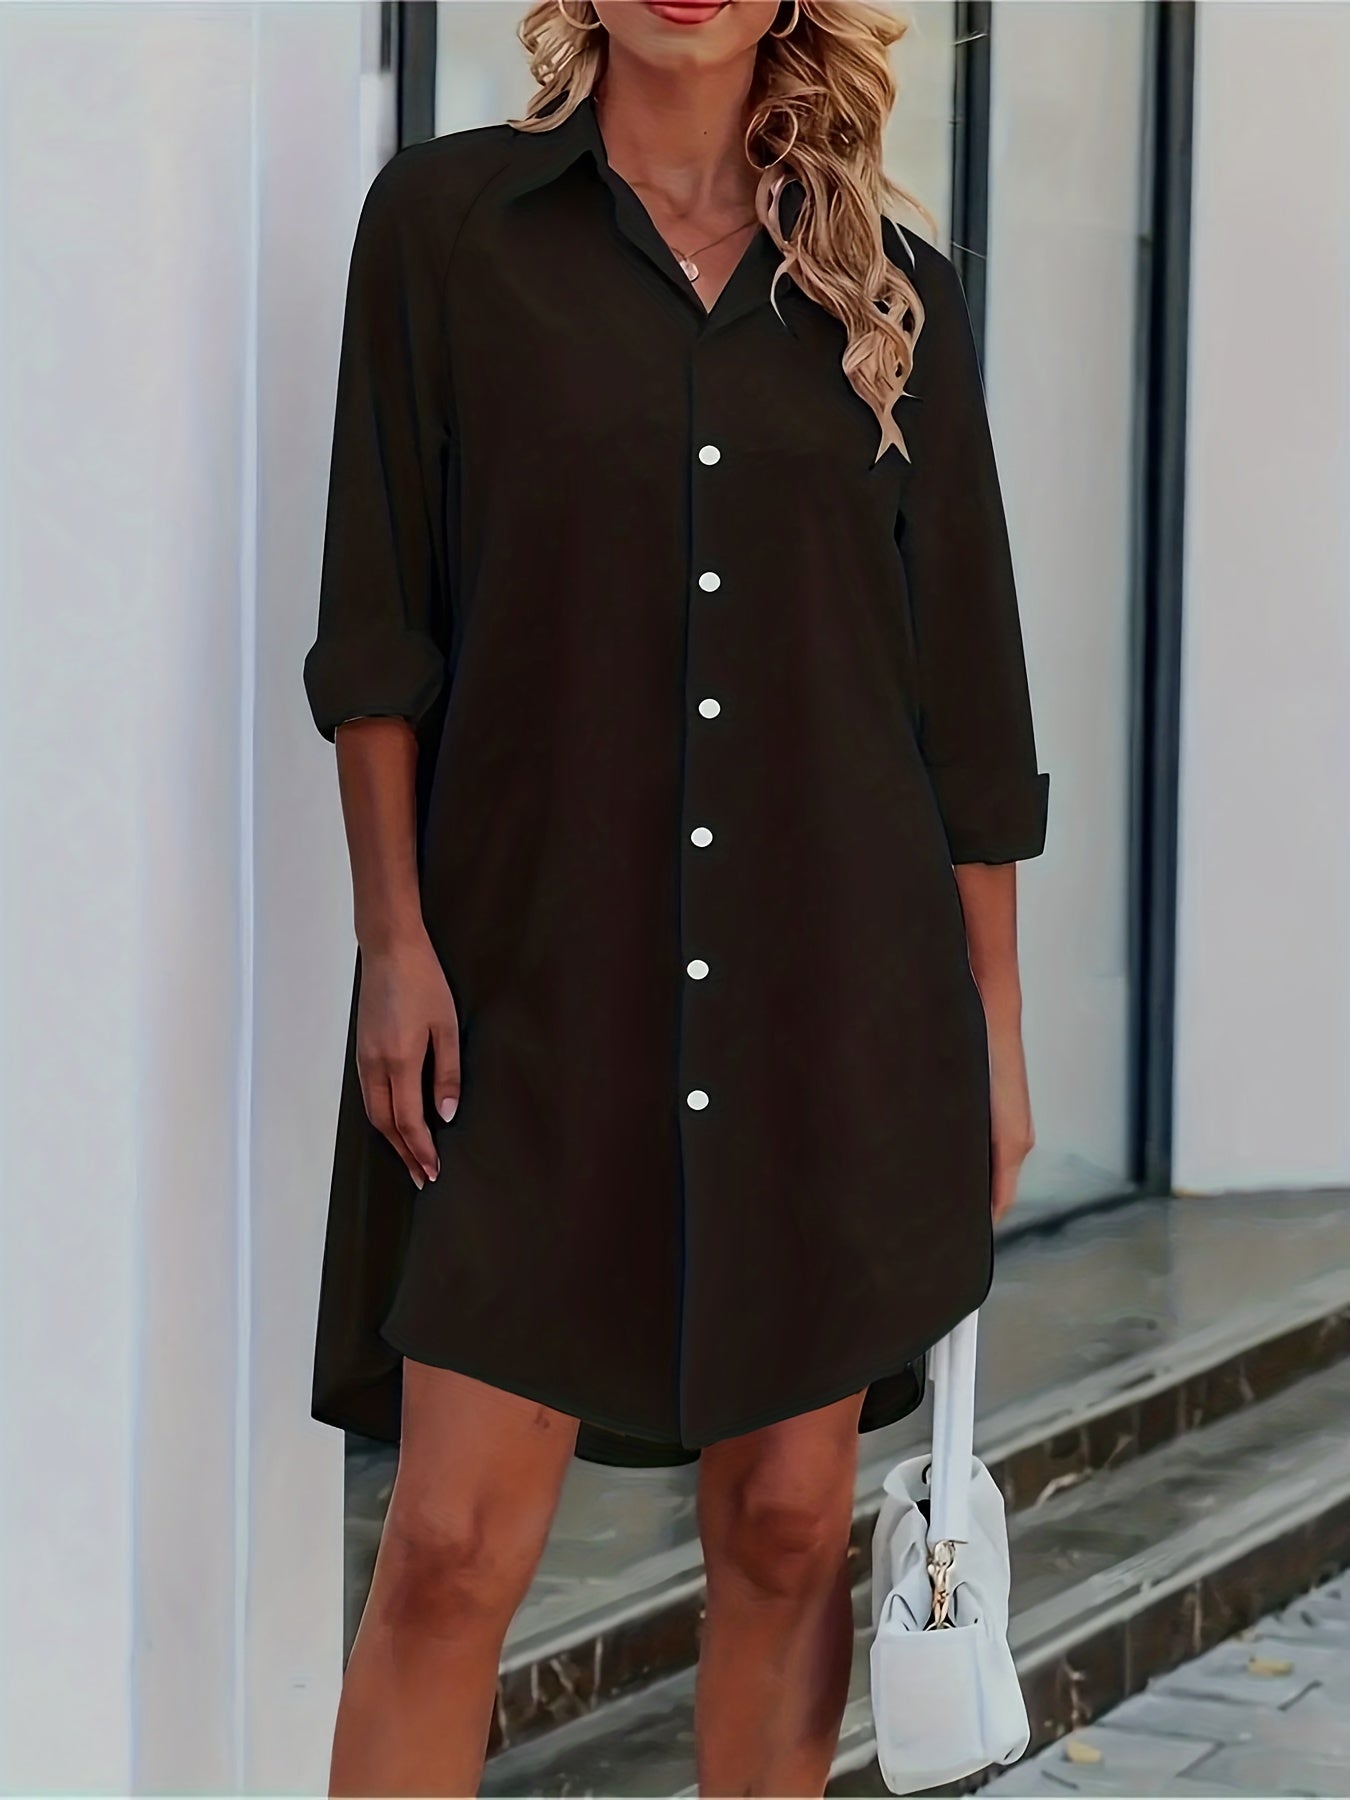 vlovelaw  Button Front Shirt Dress, Sexy 3/4 Sleeve Solid Turn Down Collar Dress, Women's Clothing